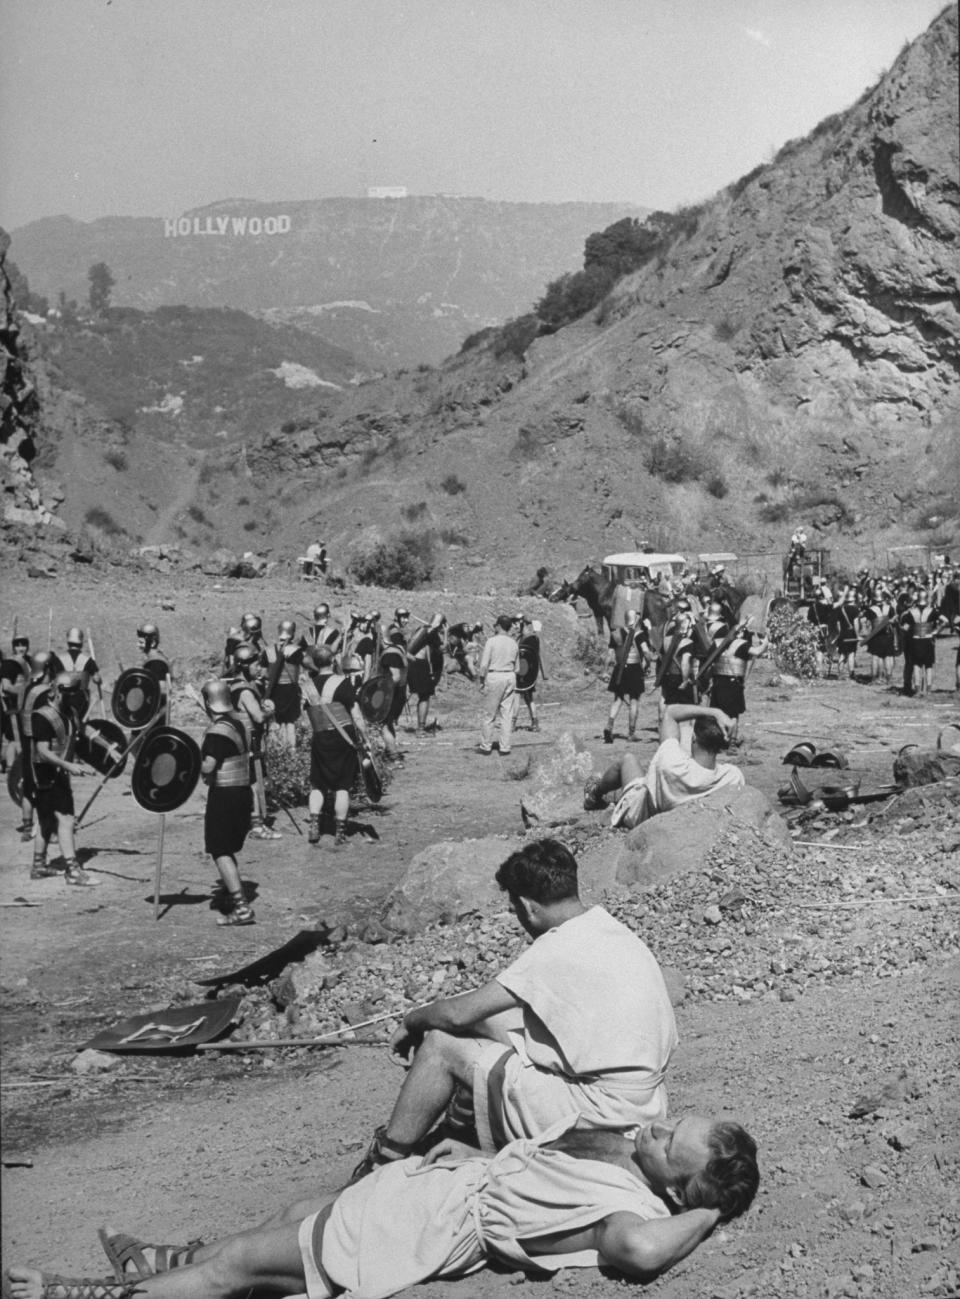 Extras portraying Roman soldiers resting in treeless valley, with Hollywood sign visible on hill in background during filming of Julius Caesar.